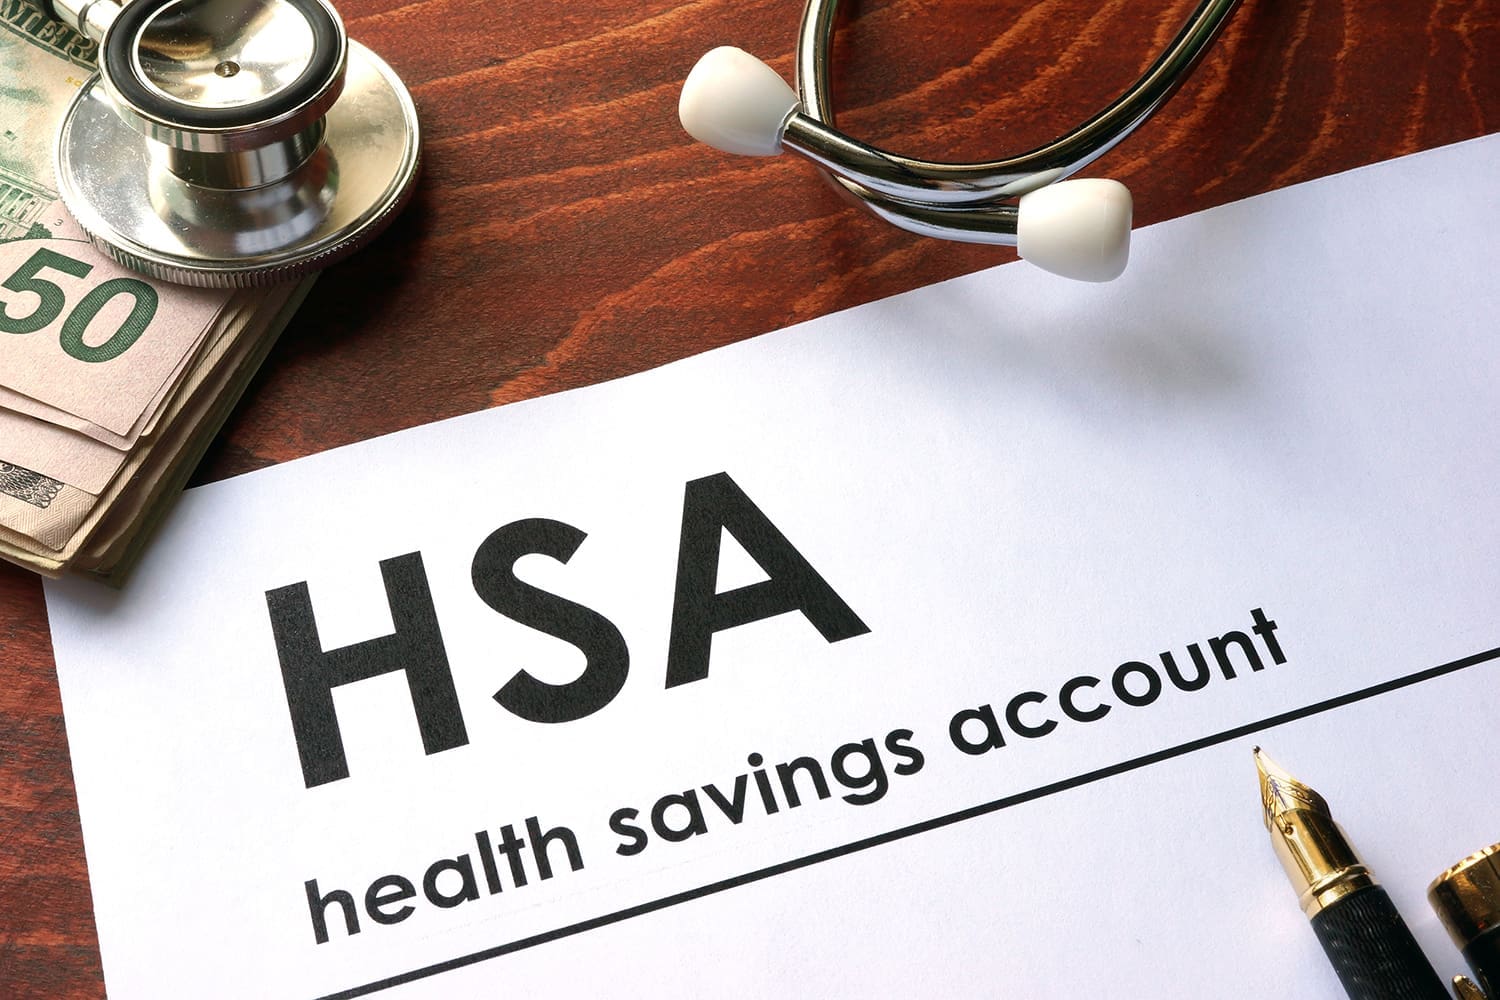 IRS: You Can Now Use Your FSA and HSA to Buy Masks